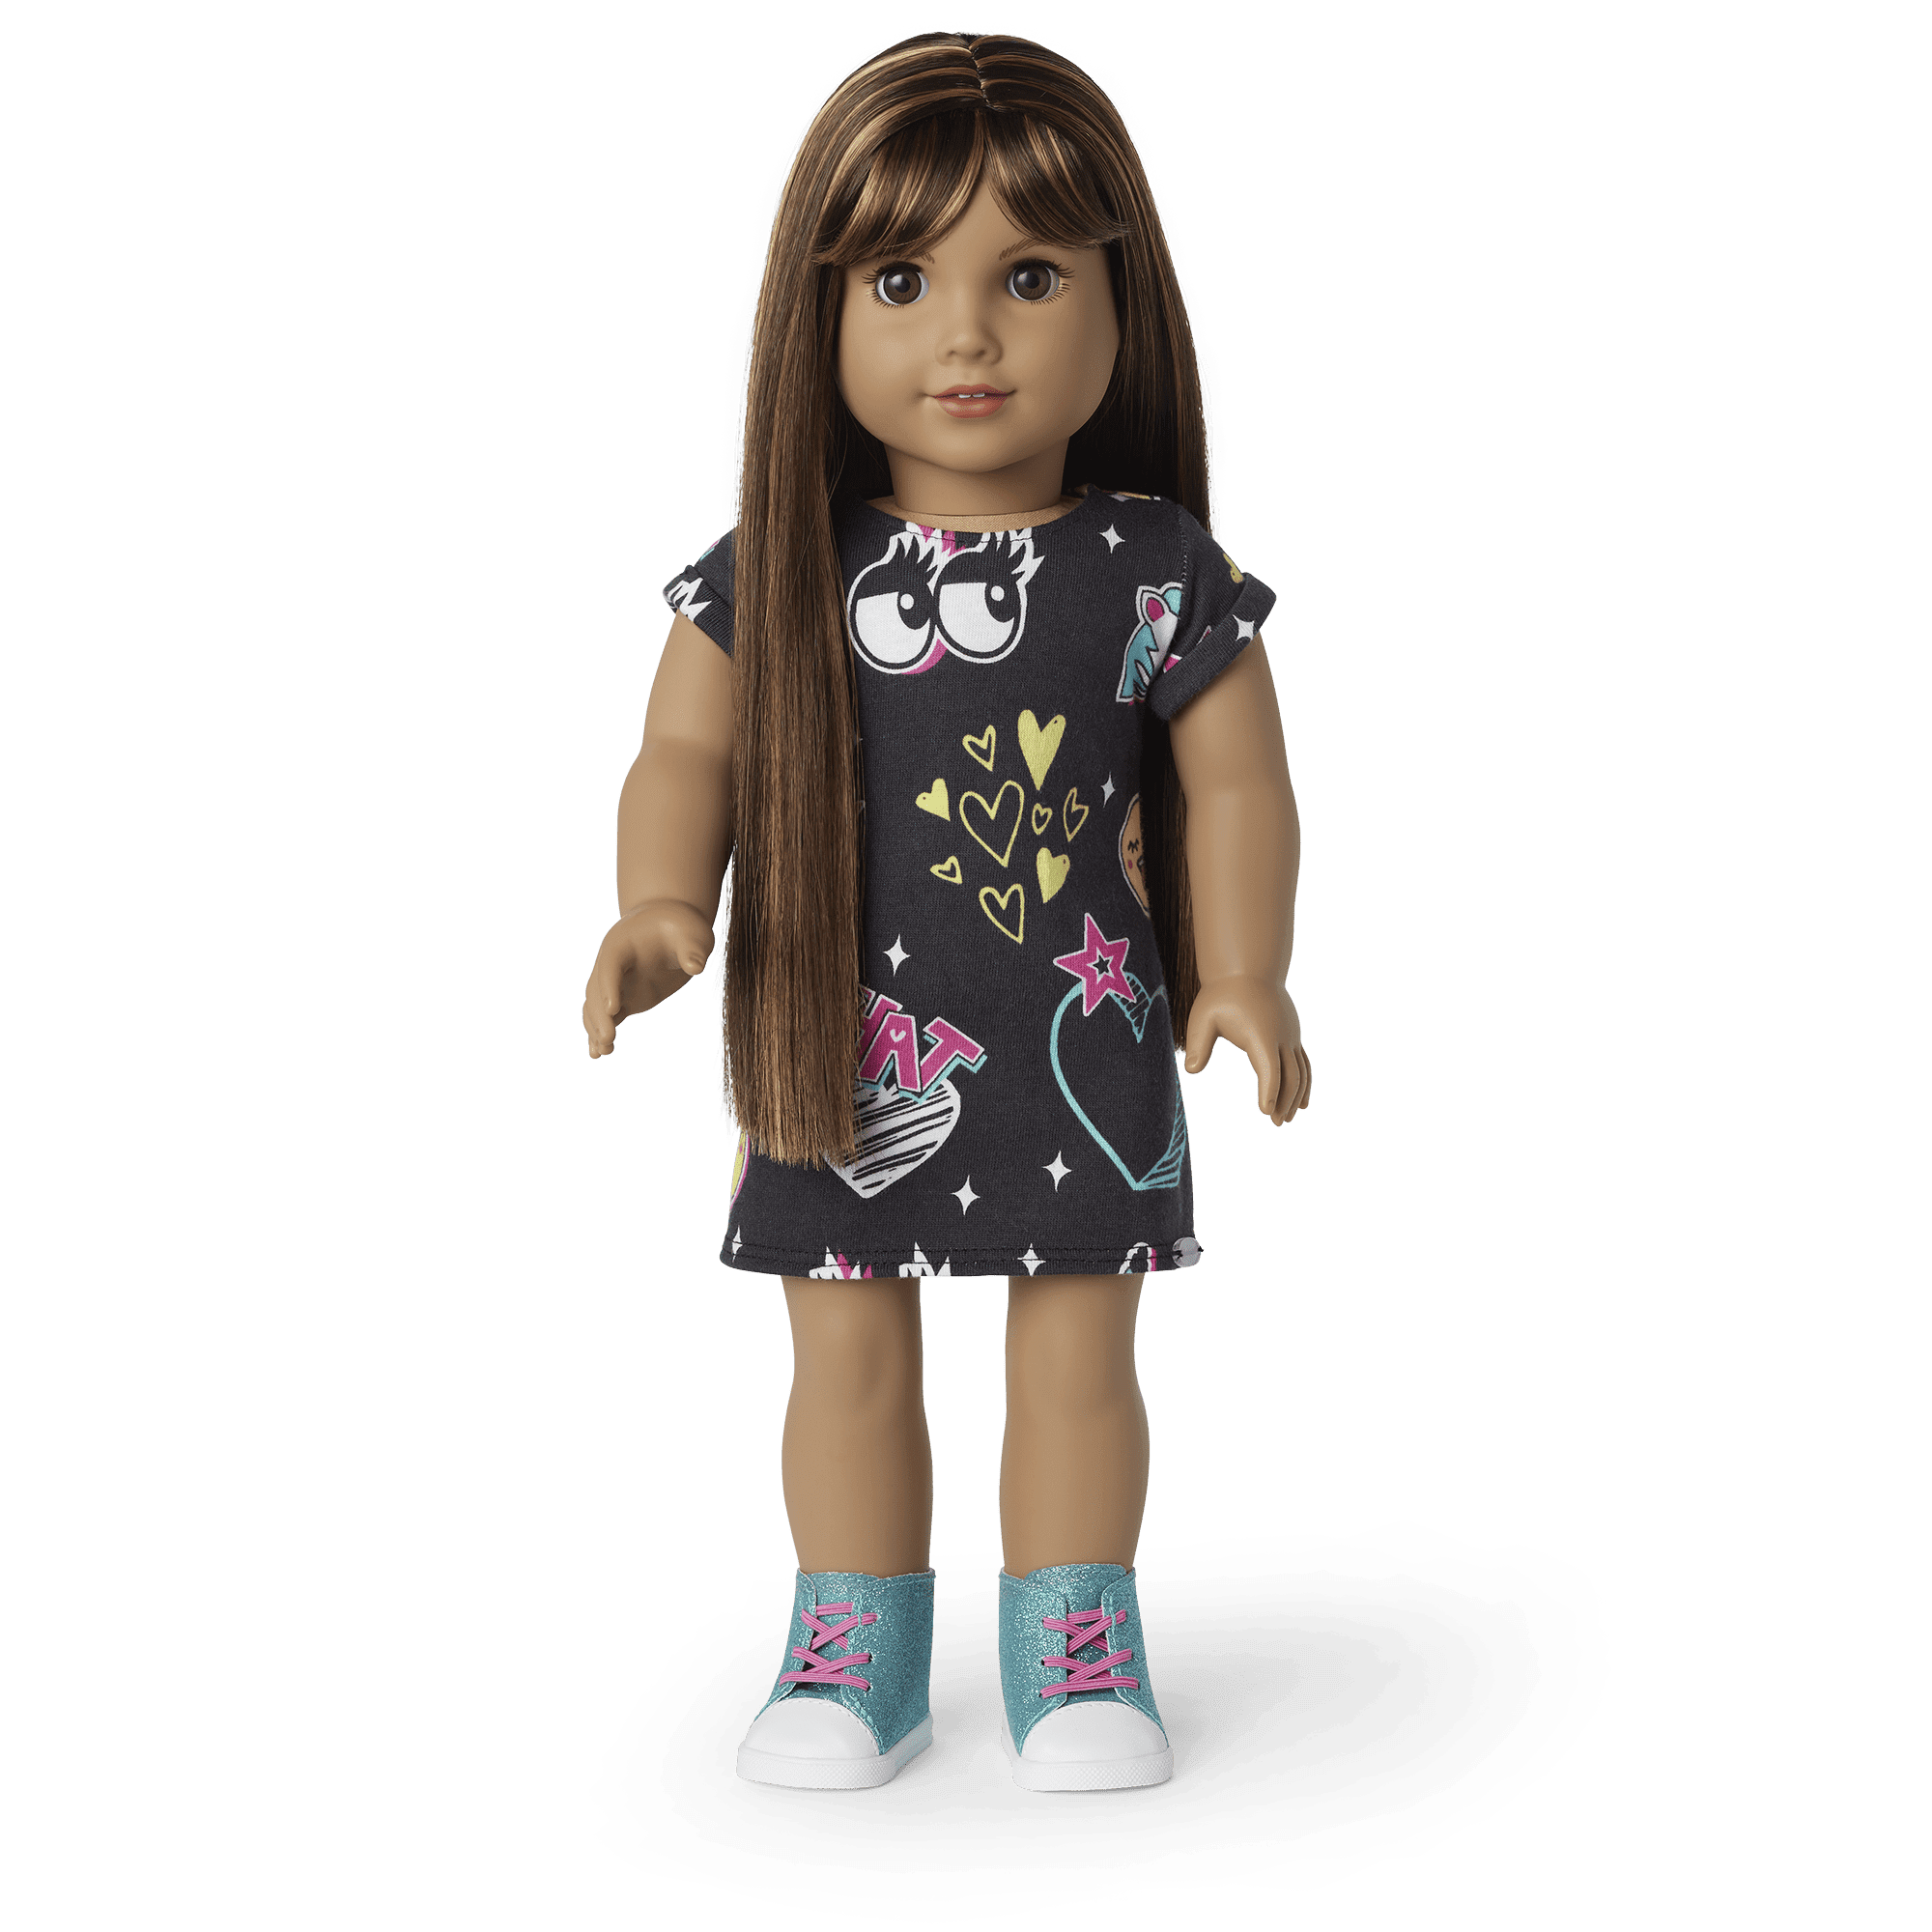 Show Your Wild Side Outfit for 18-inch Dolls